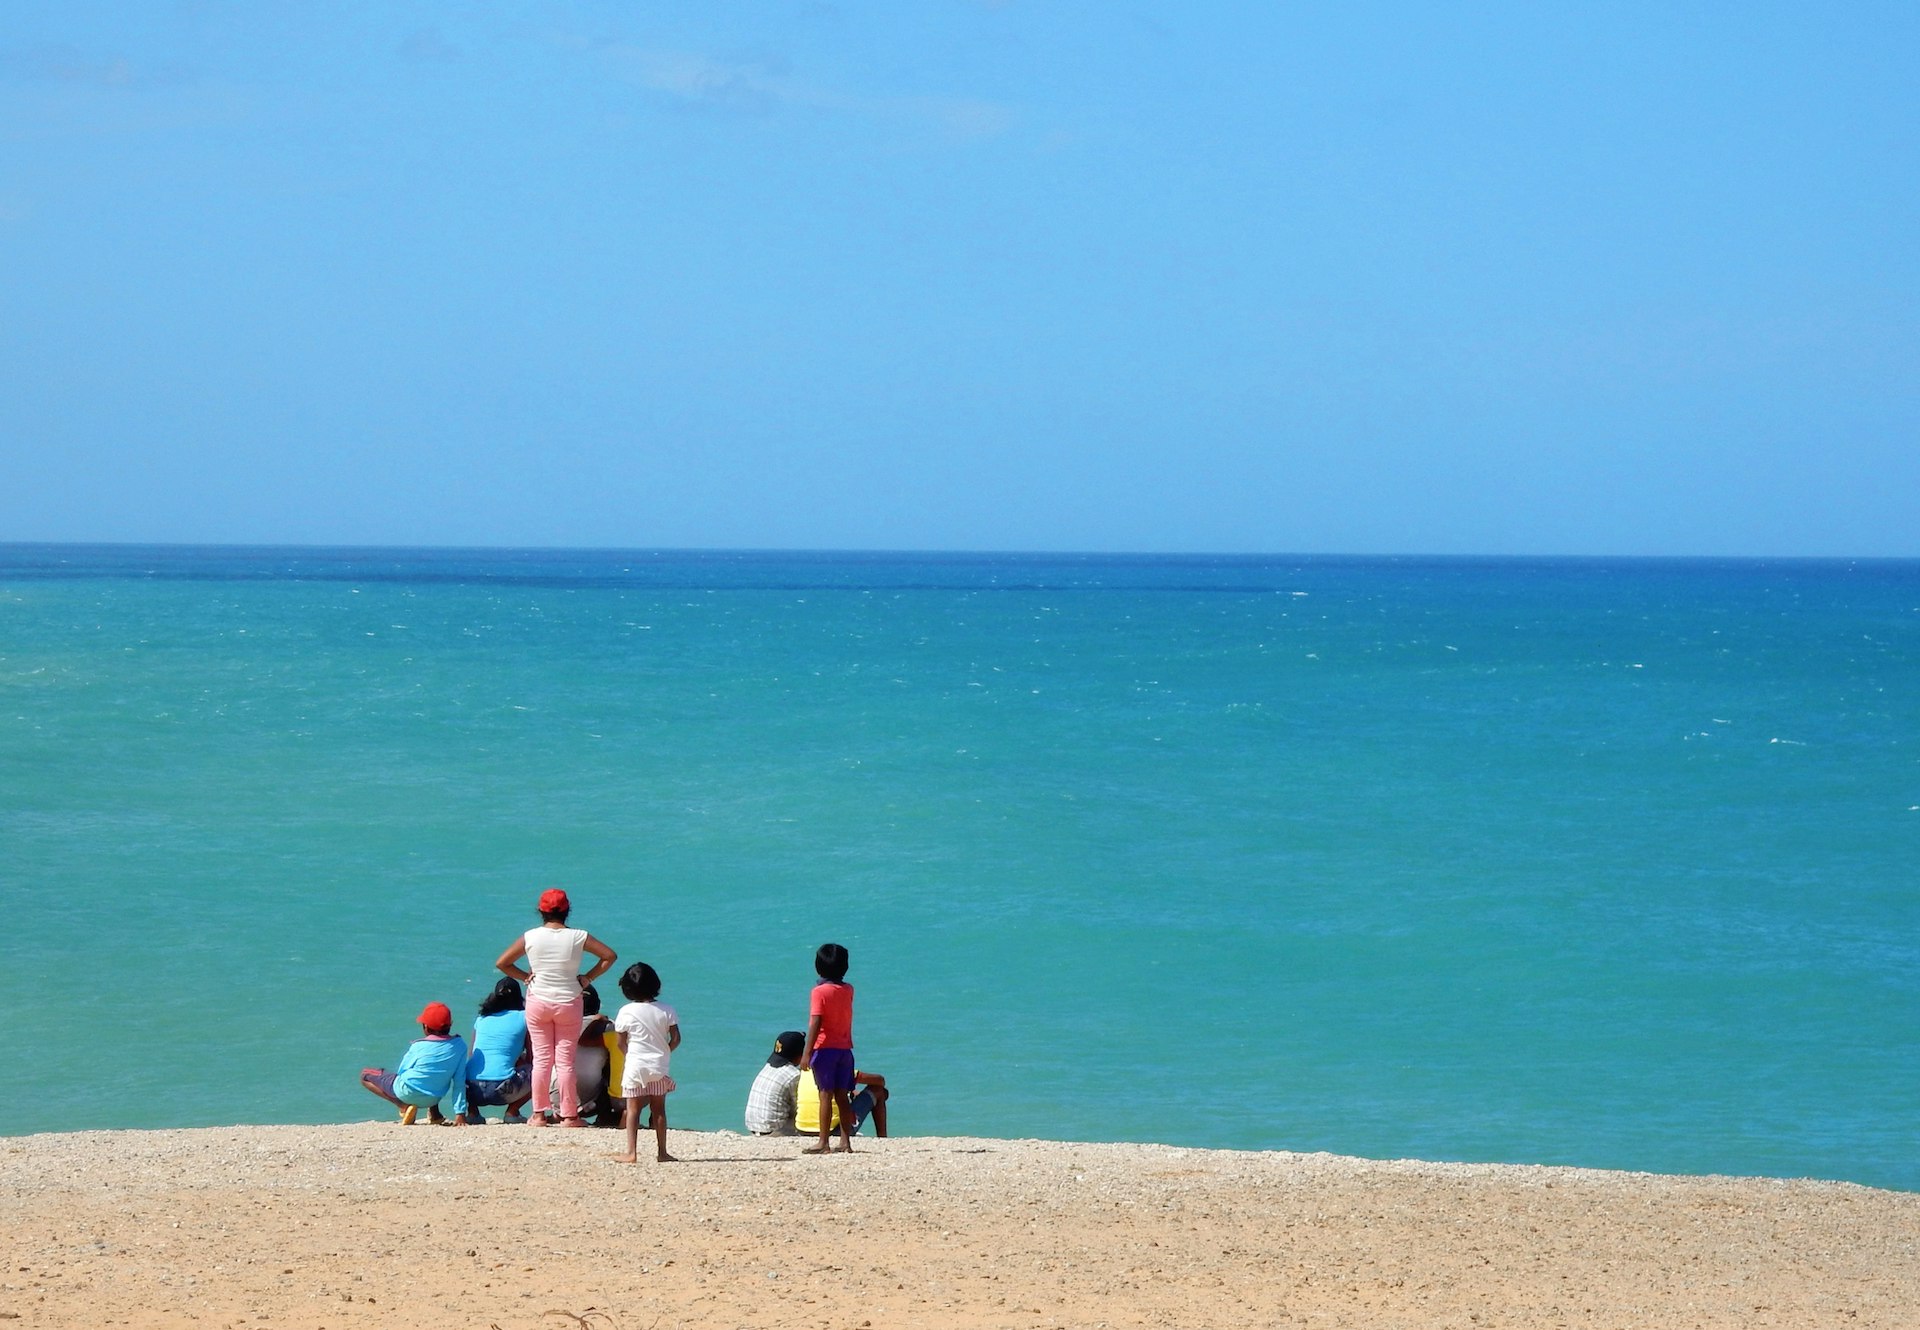 A family looks out at the ocean on La Guajira Peninsula, Colombia